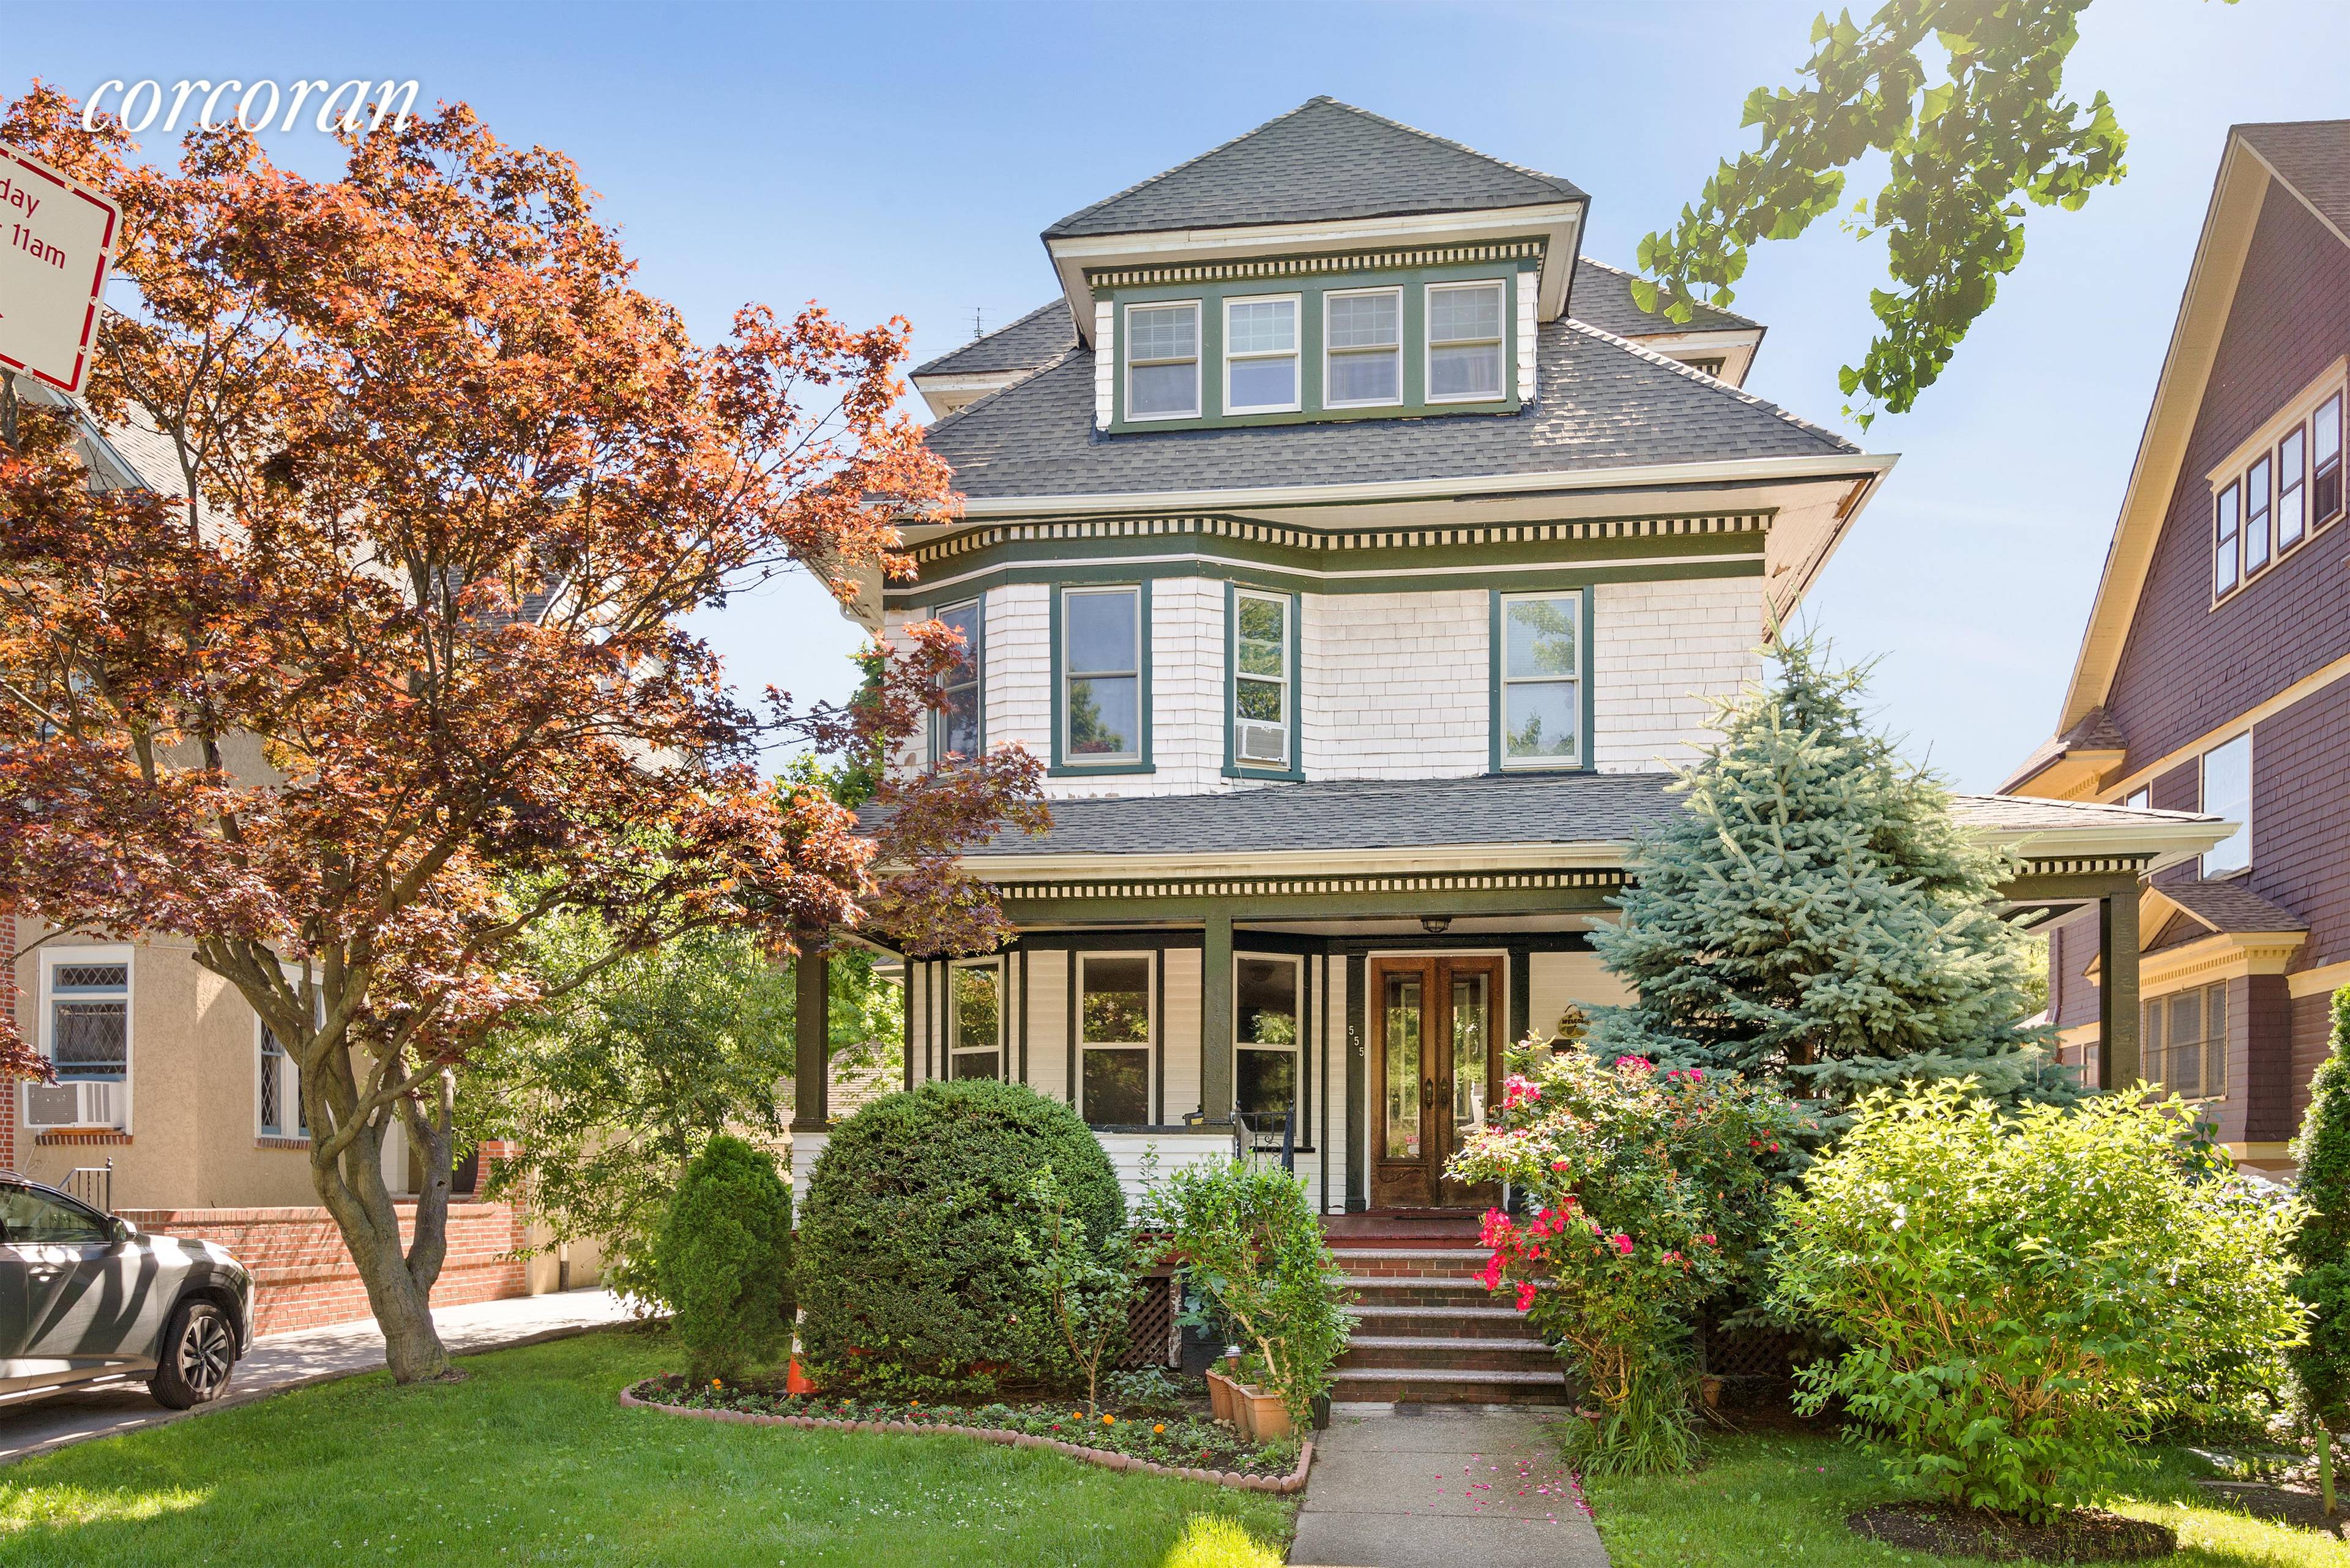 Welcome to 555 East 17th Street, located on a serene tree lined street in Ditmas Park.